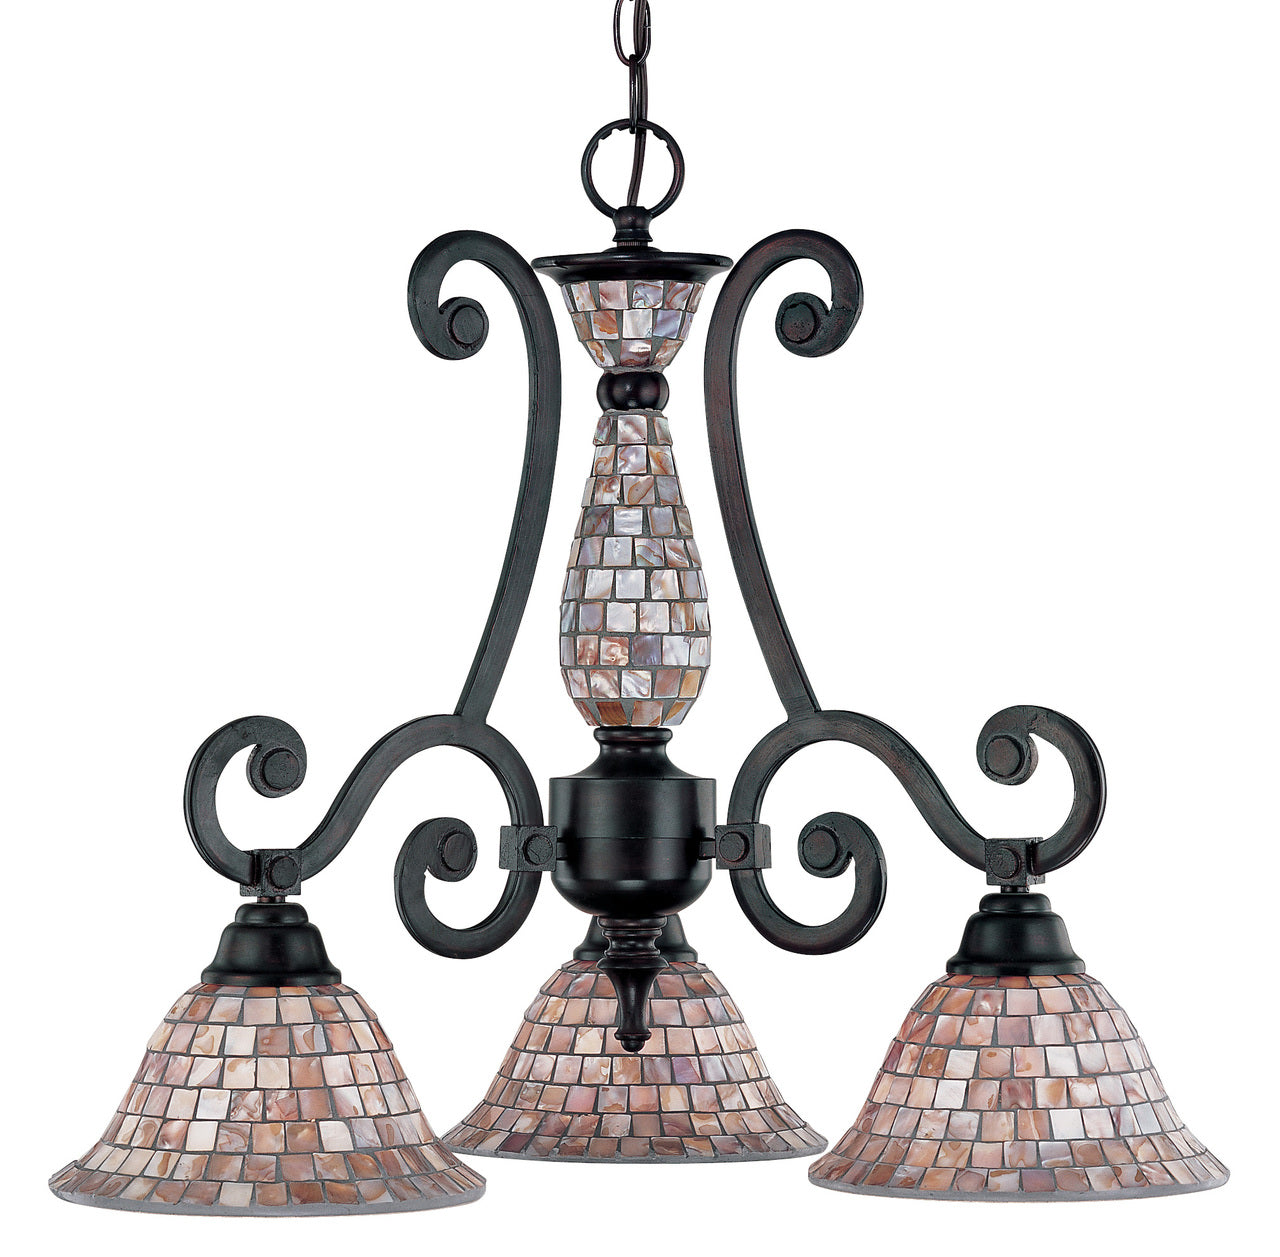 Classic Lighting 71146 ORB Pearl River Wrought Iron Chandelier in Oil-Rubbed Bronze